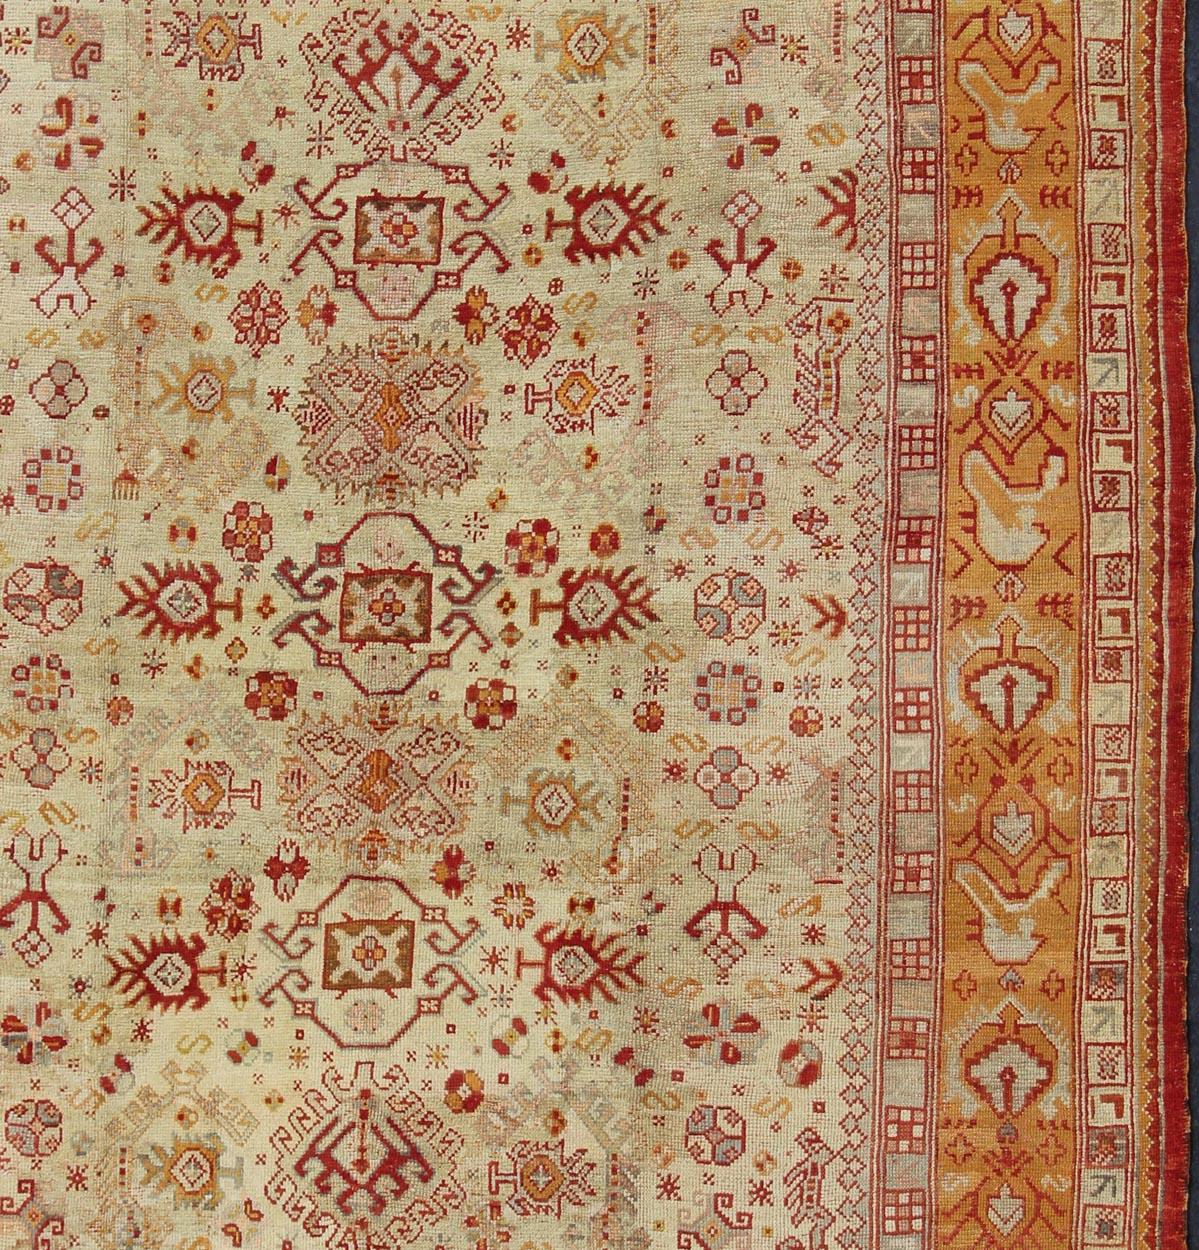 Antique Turkish Oushak Carpet With All-Over Design In Red, Taupe, and Orange In Excellent Condition For Sale In Atlanta, GA